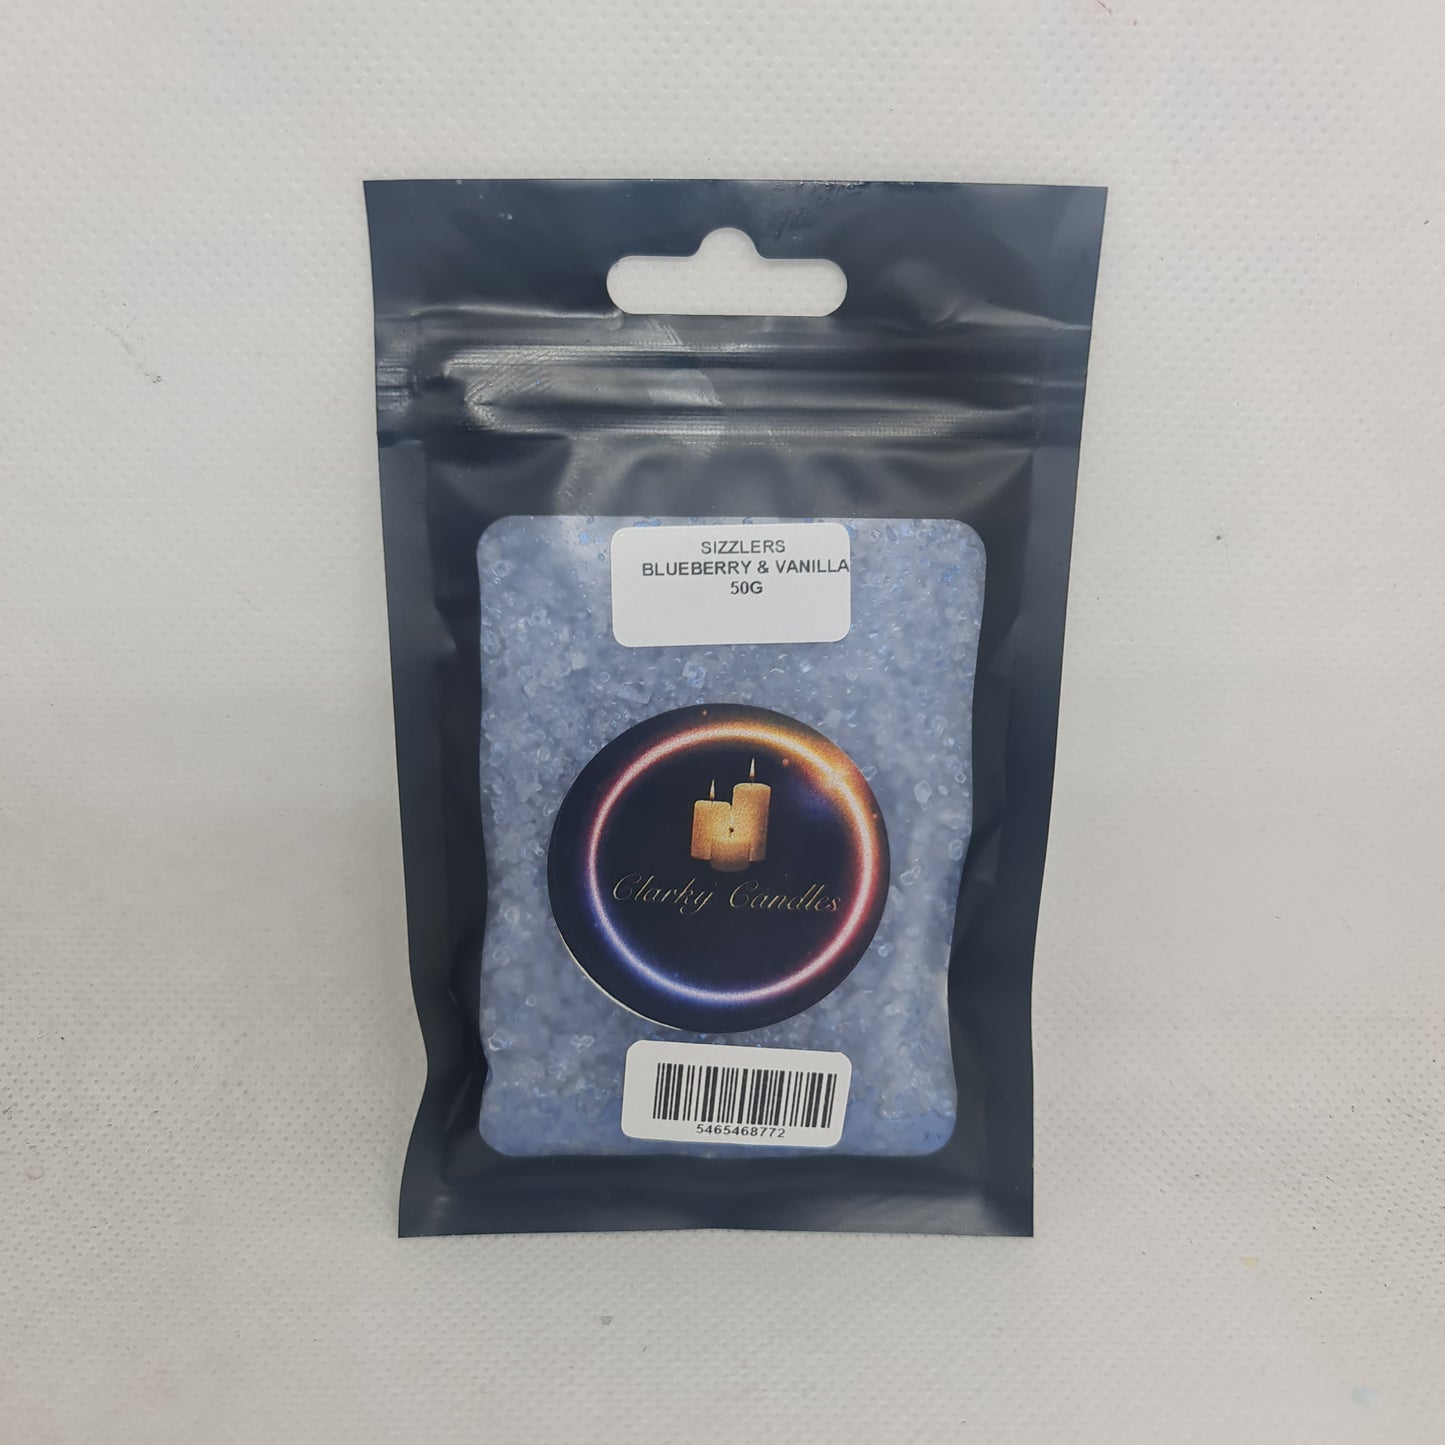 Blueberry & Vanilla - 50g - Scented Sizzlers